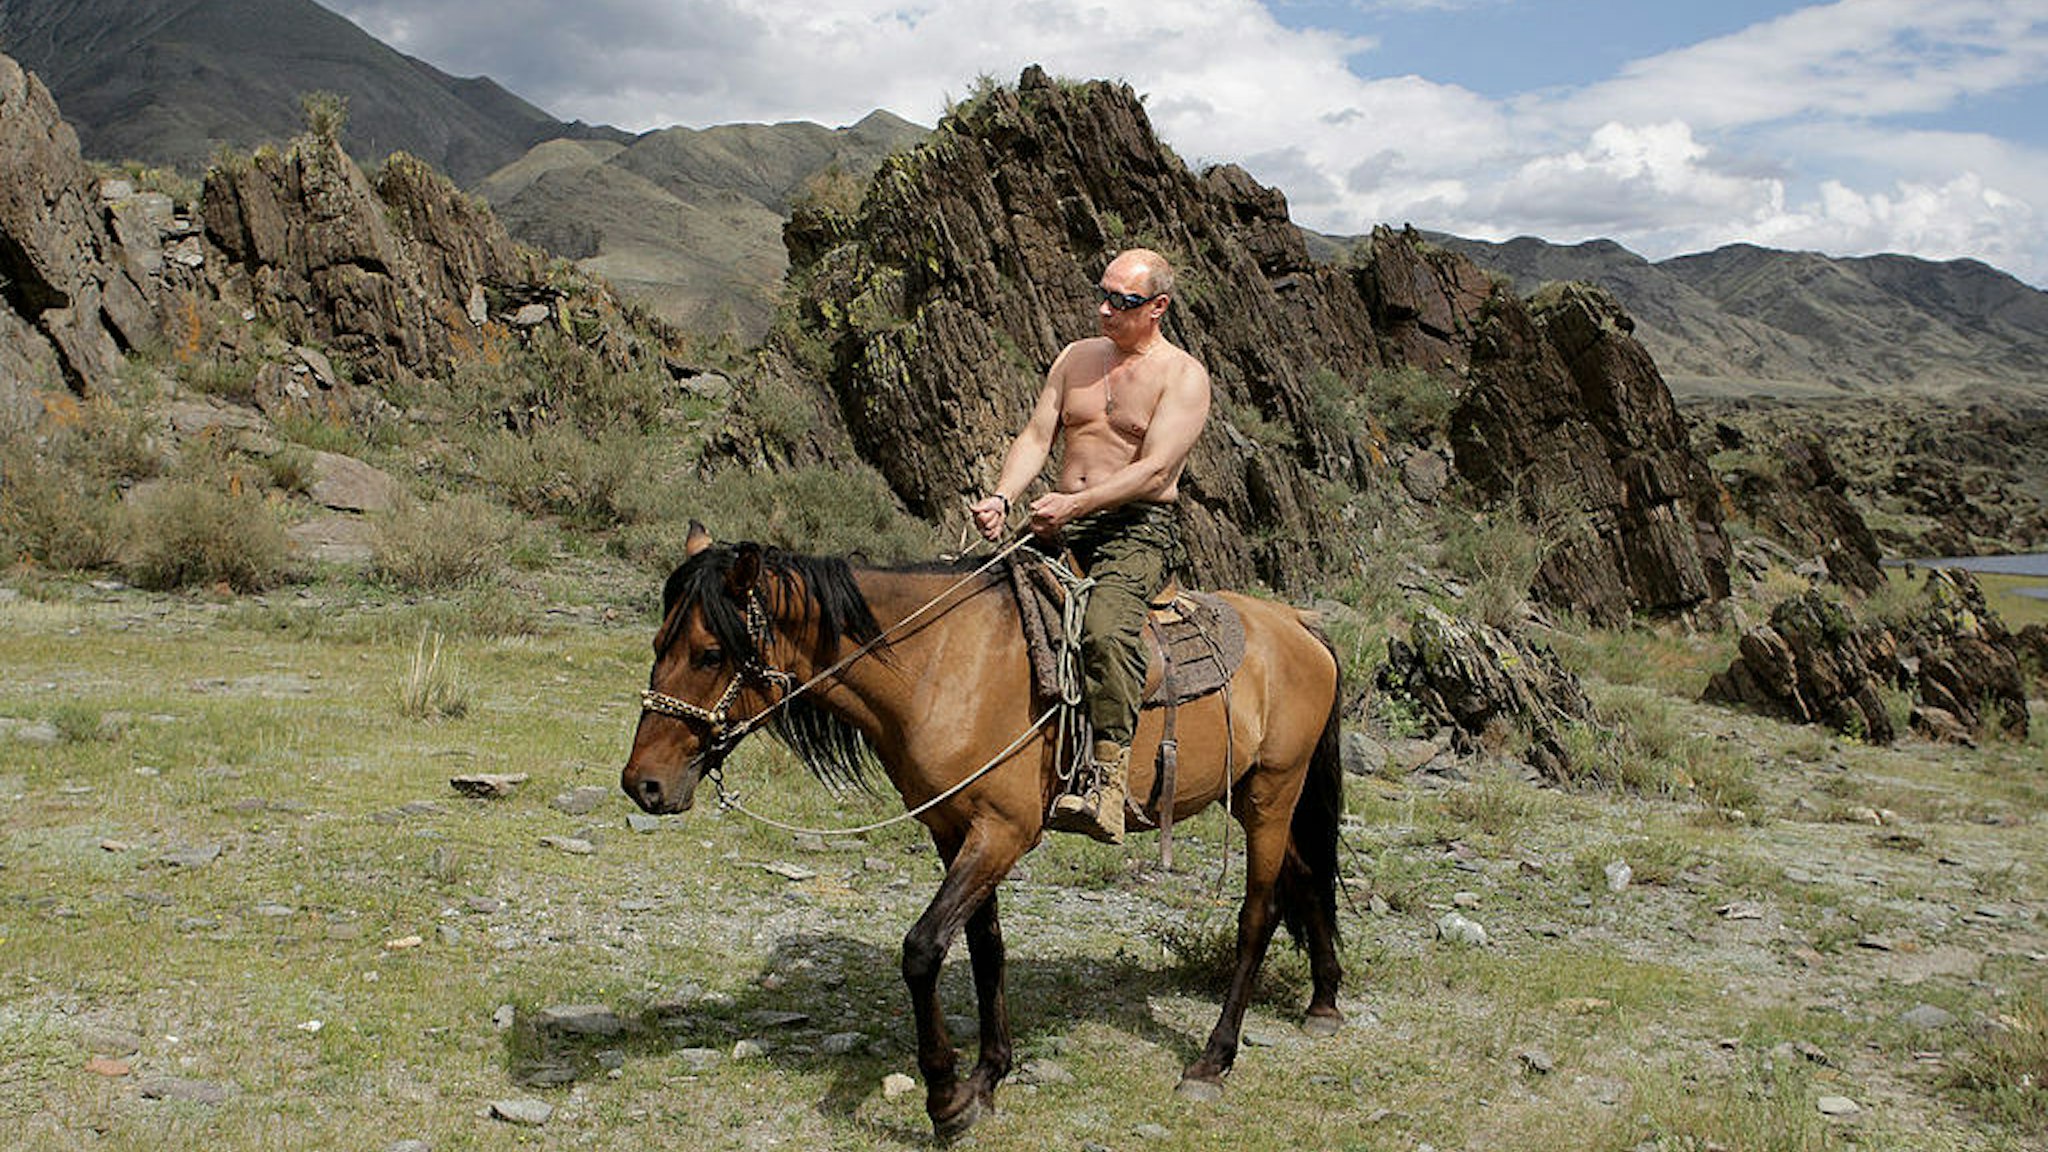 Russian Prime Minister Vladimir Putin rides a horse during his vacation outside the town of Kyzyl in Southern Siberia on August 3, 2009. AFP PHOTO / RIA-NOVOSTI / ALEXEY DRUZHININ